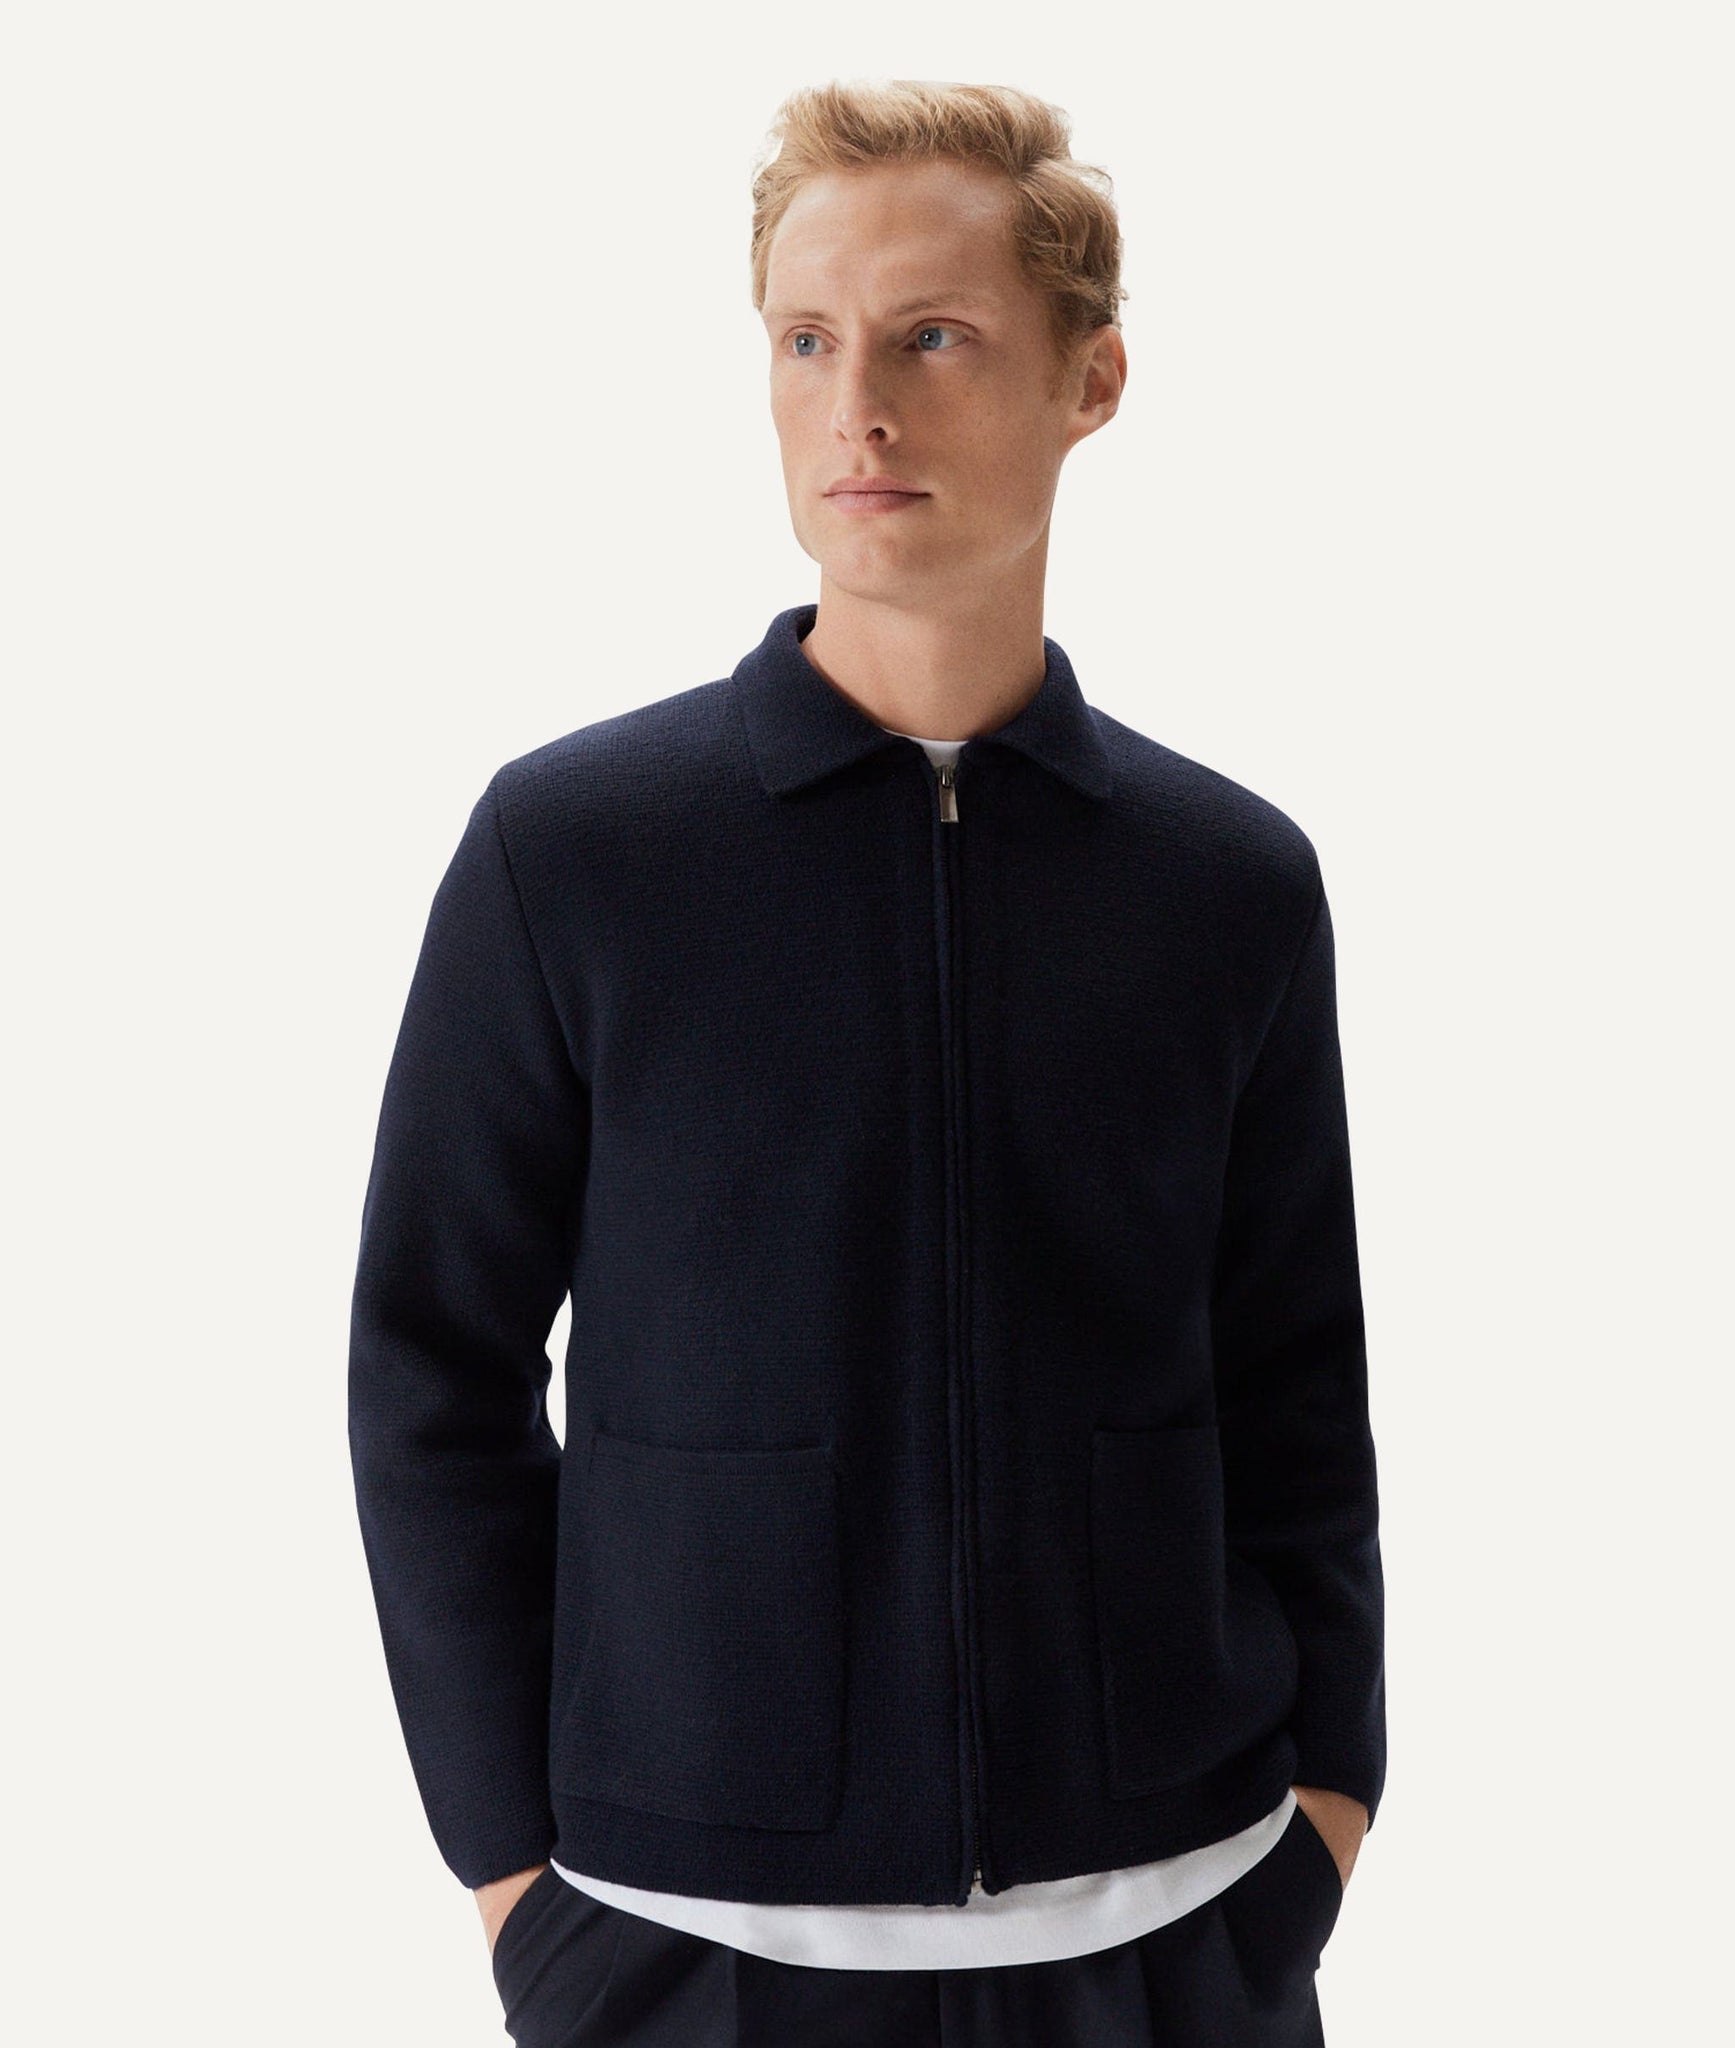 The Boiled Wool Zip Jacket - Oxford Blue / M - Anthracite Grey / XL - Anthracite Grey / M